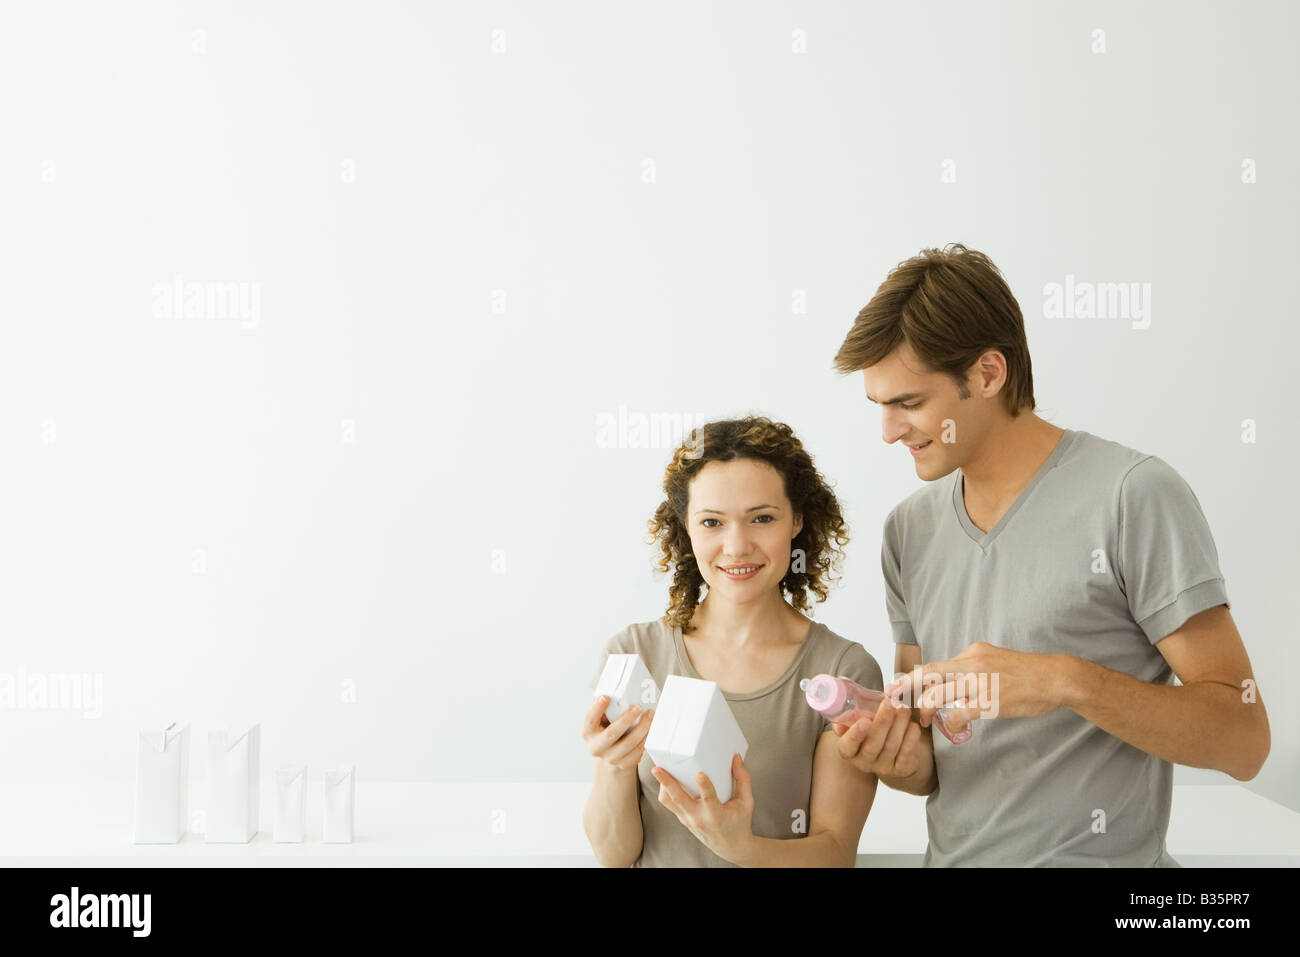 New parents looking at milk cartons, man holding baby bottle, woman smiling at camera Stock Photo